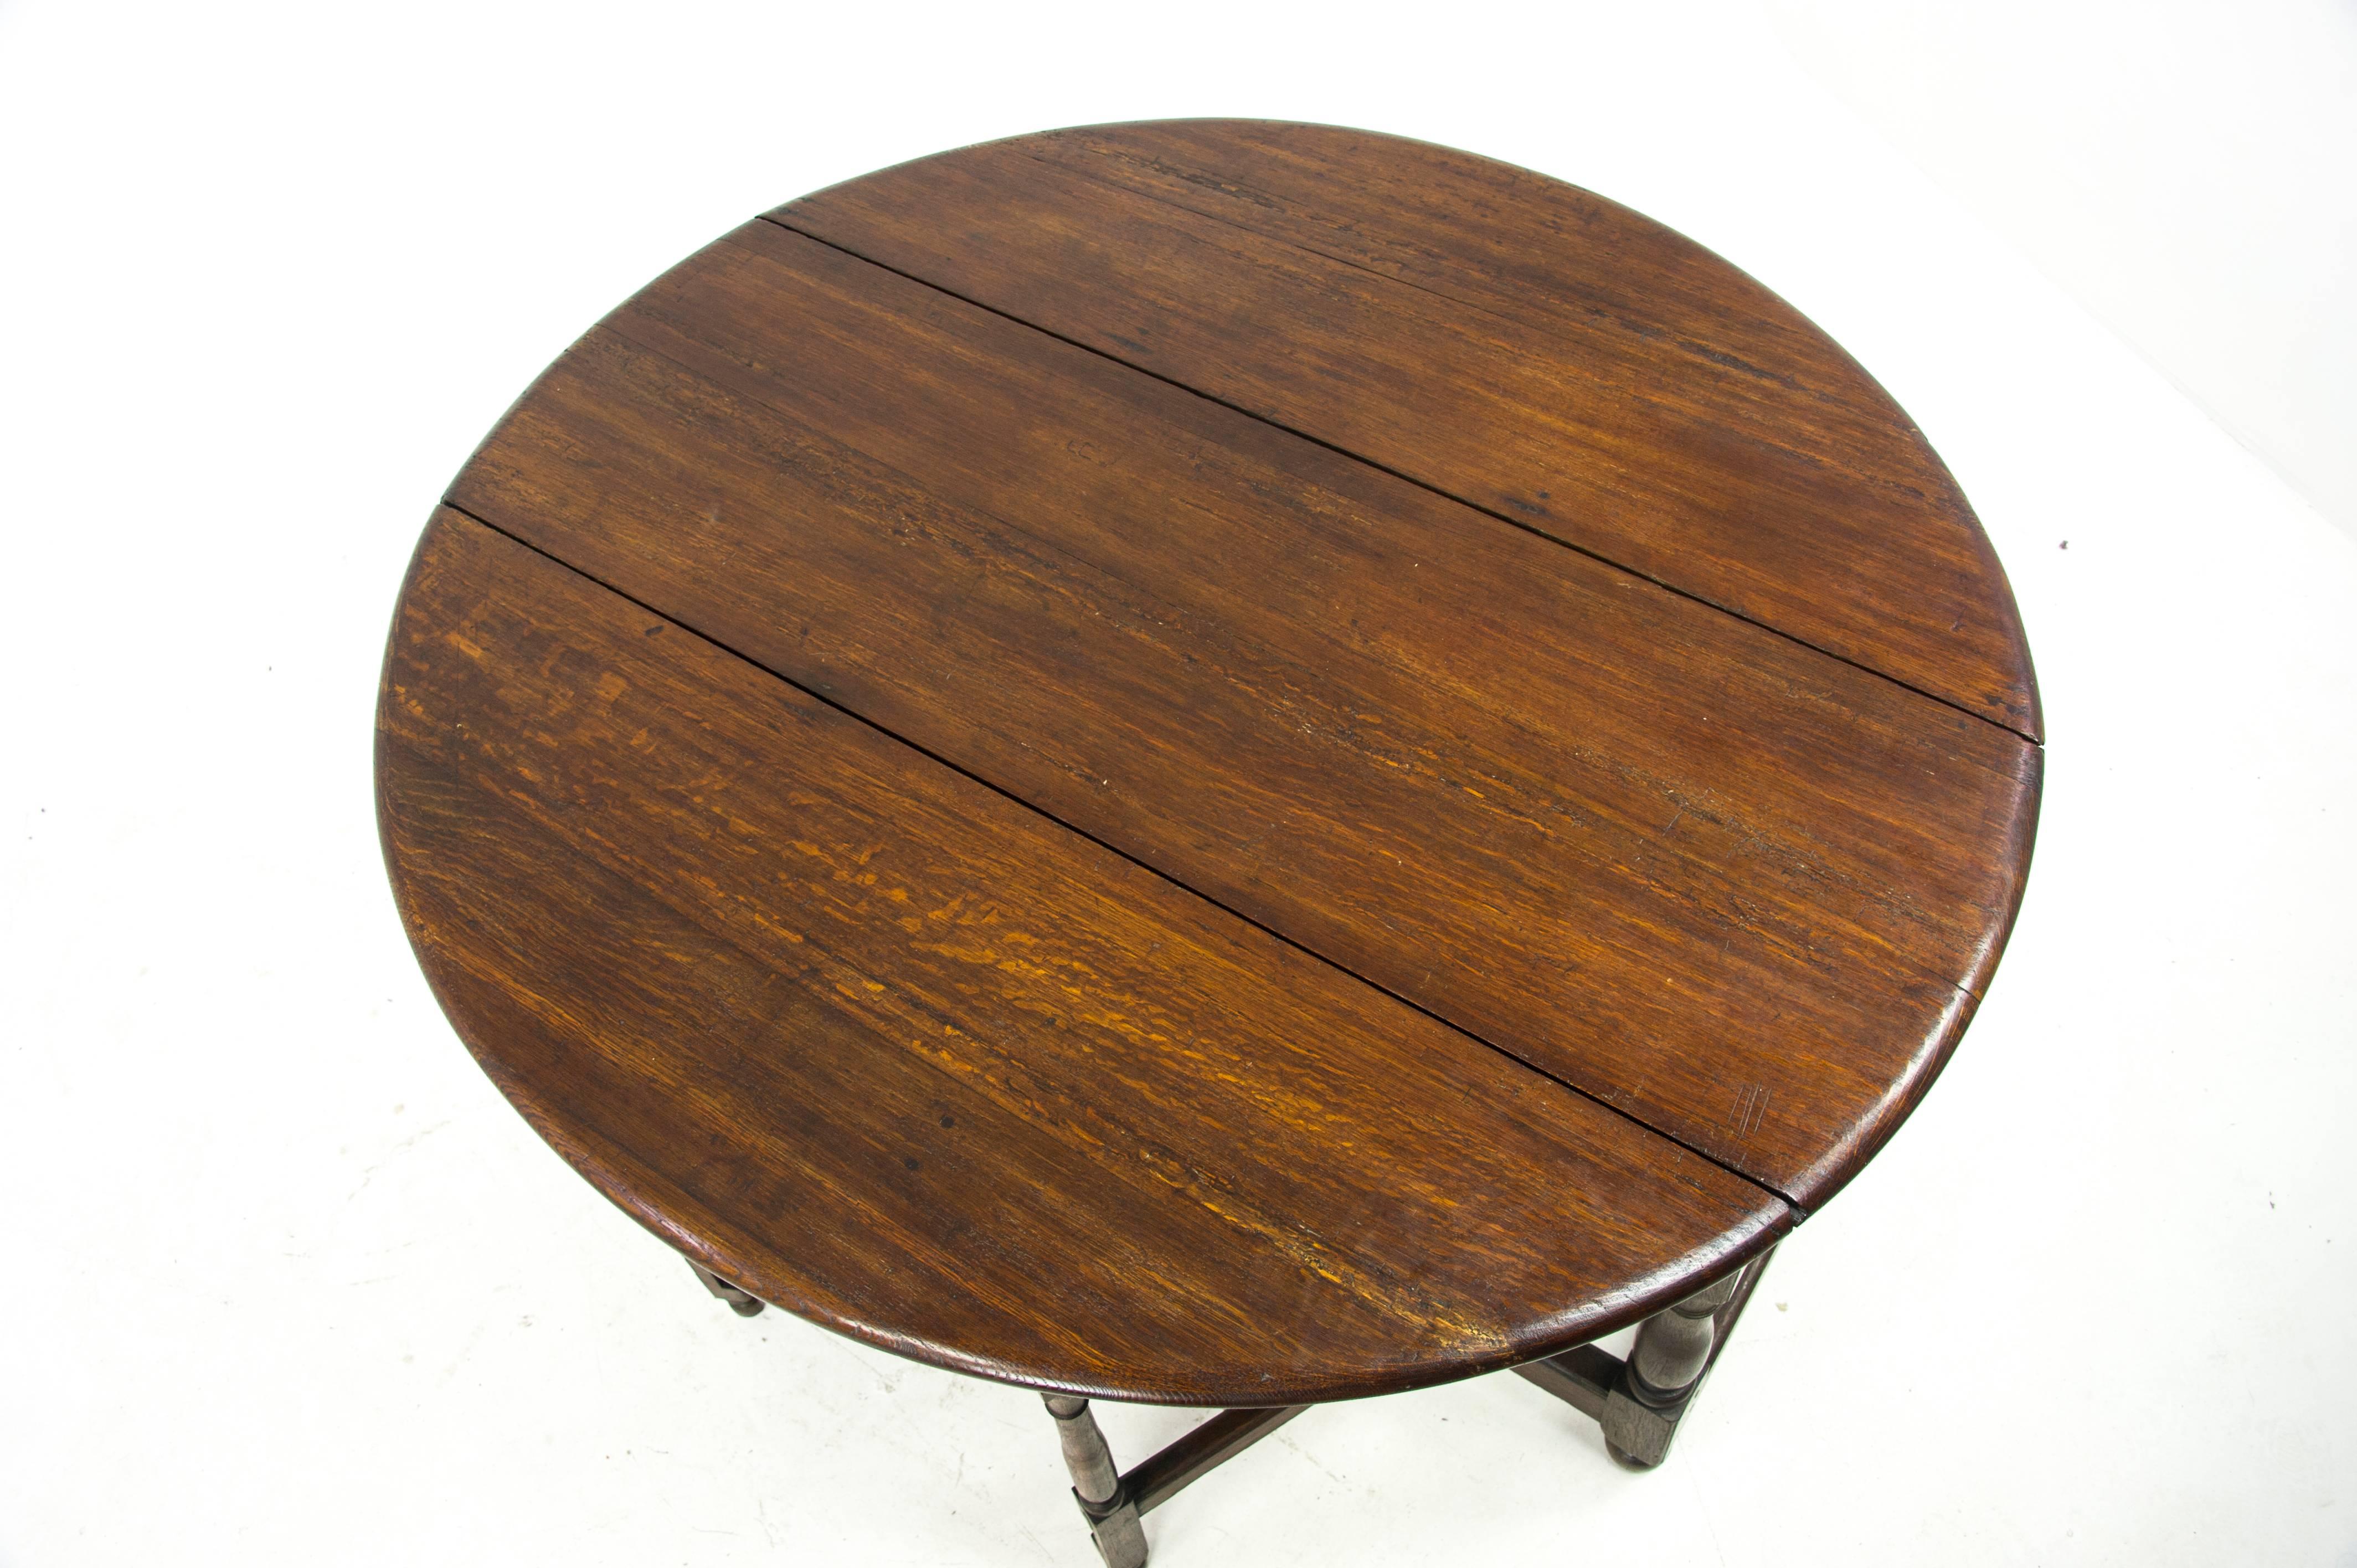 Antique gateleg table, oak drop-leaf table, George third table, Scotland, 1800, Antique Furniture, B1031.

Scotland, 1800
Solid oak construction
Original finish
Features an oval drop-leaf top with two gatelegs underneath
Thick wooden top and